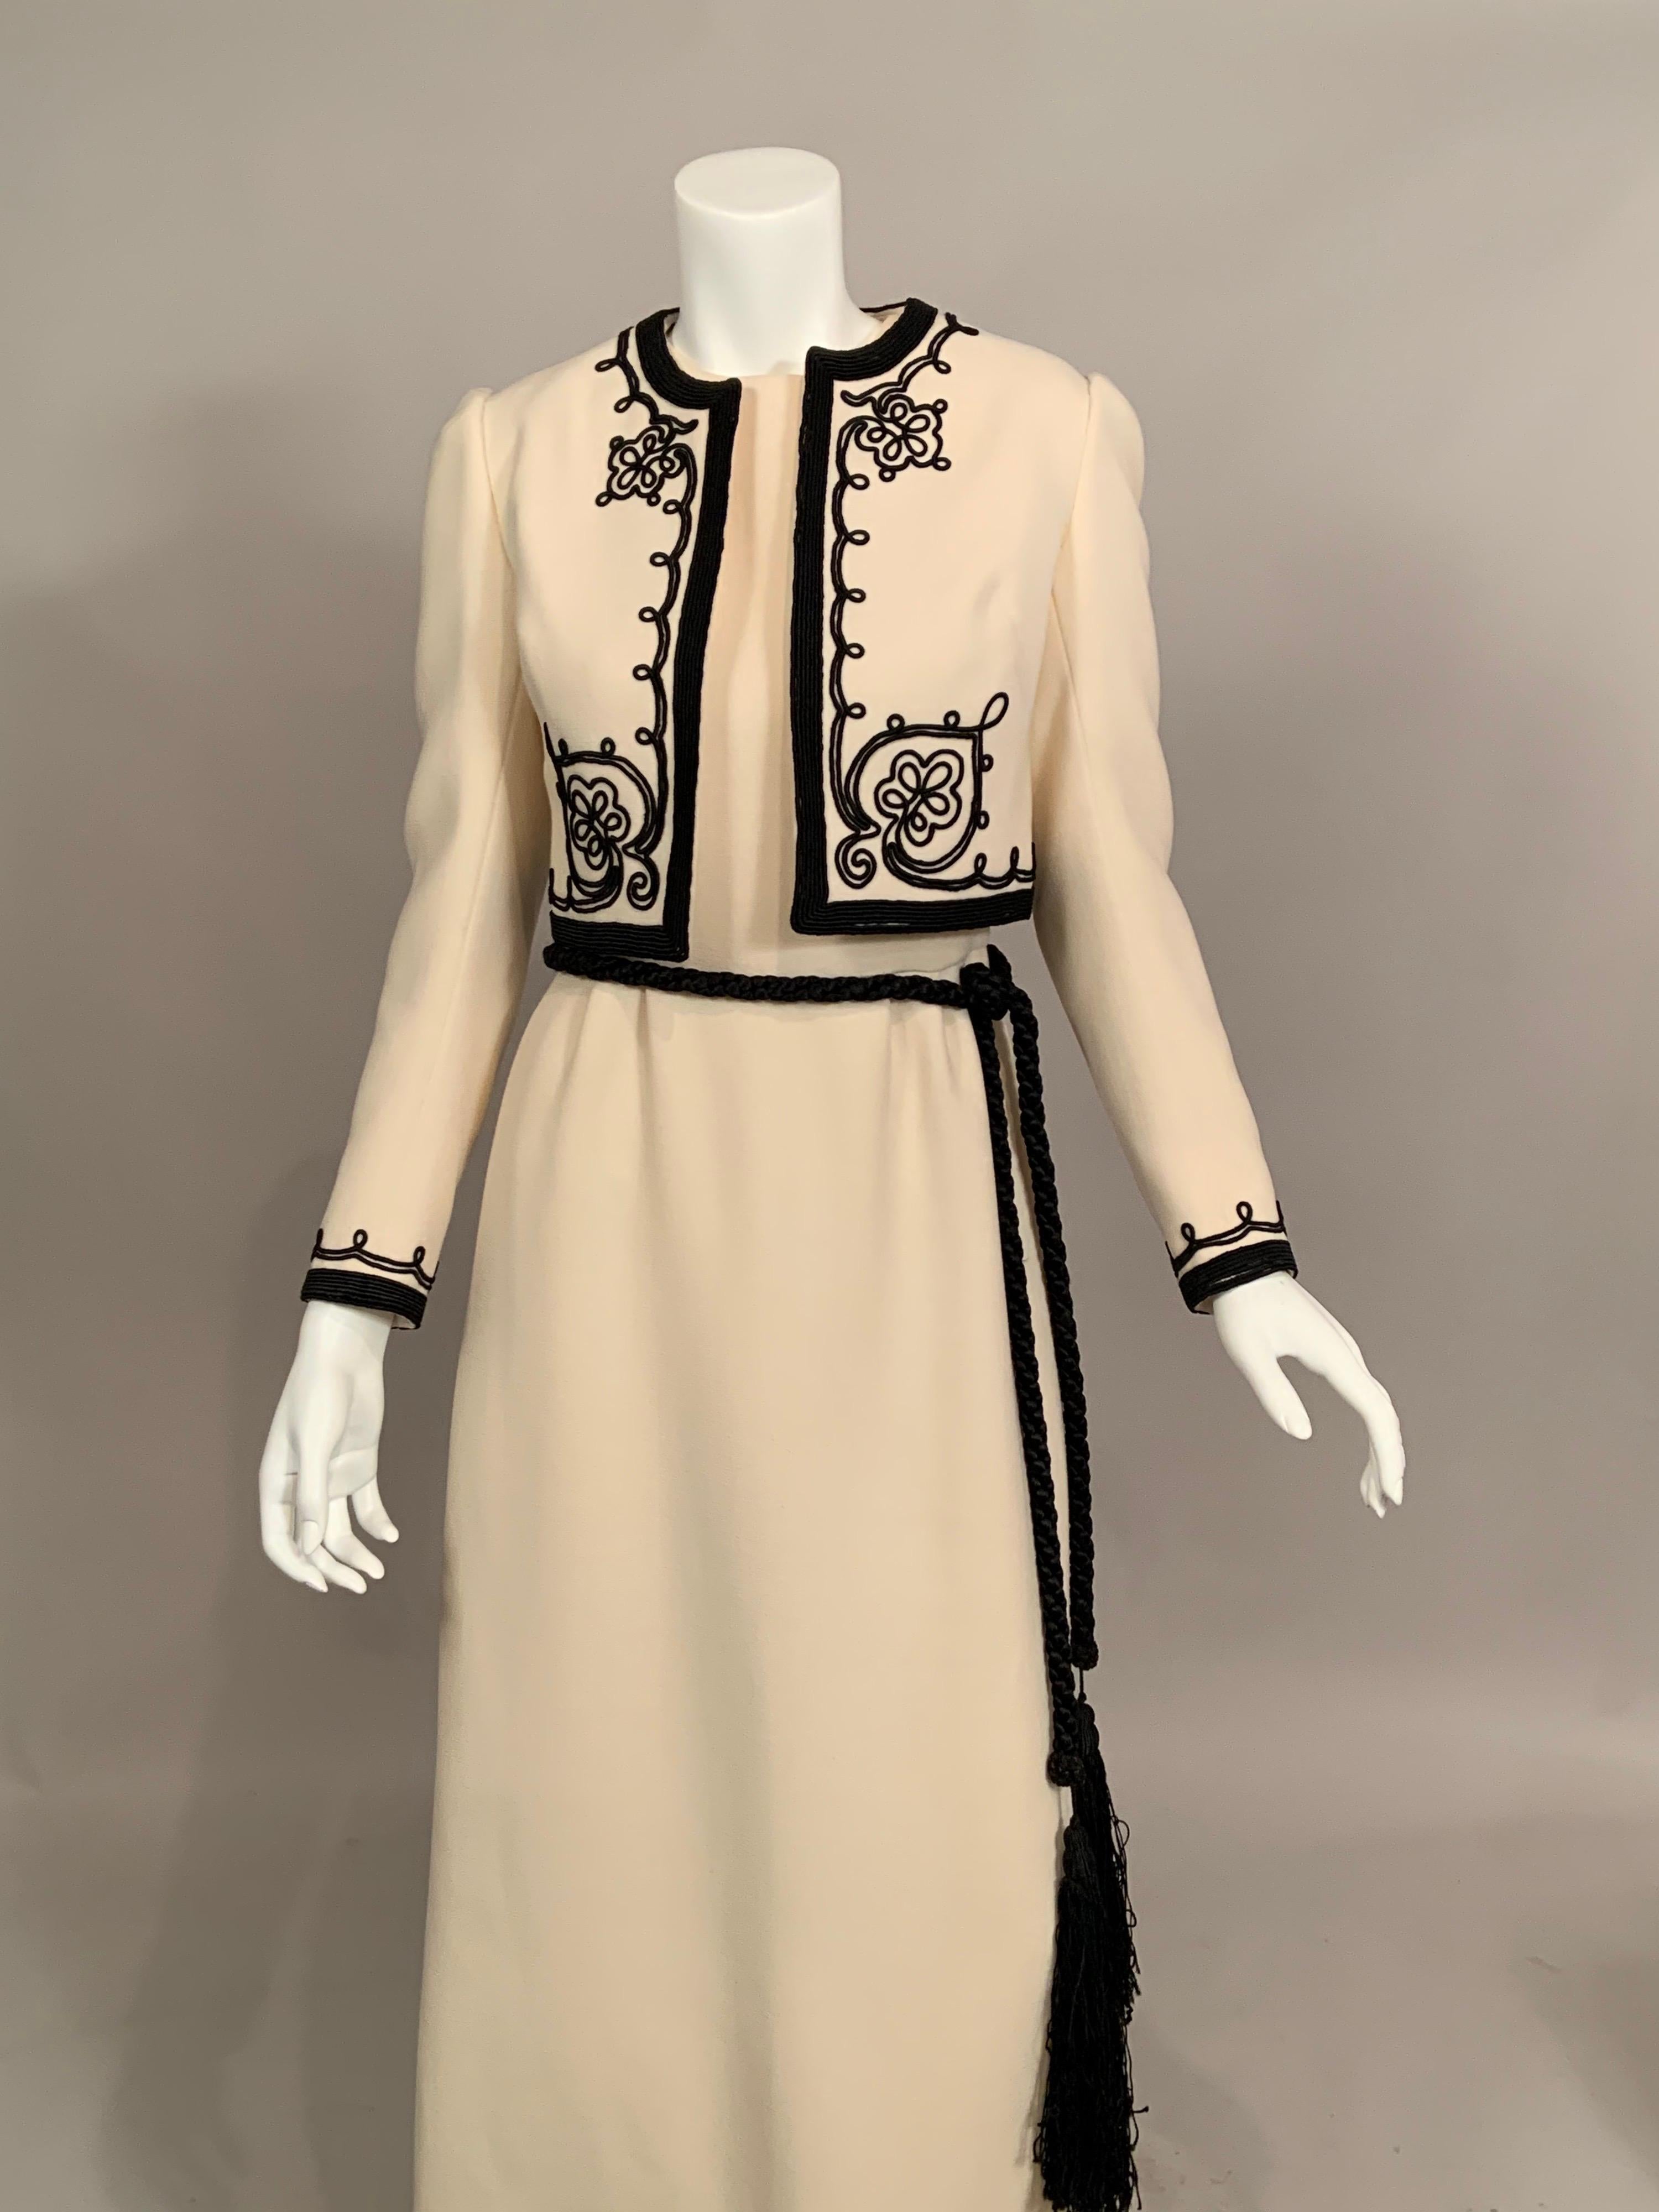 Cream wool is accented by black silk soutache on this evening dress and jacket deigned by Harry Algo in Paris for the Julius Garfinckel Department Store in Washington, D.C. in the 1960's.  The sleeveless dress has a round neckline, Armholes trimmed